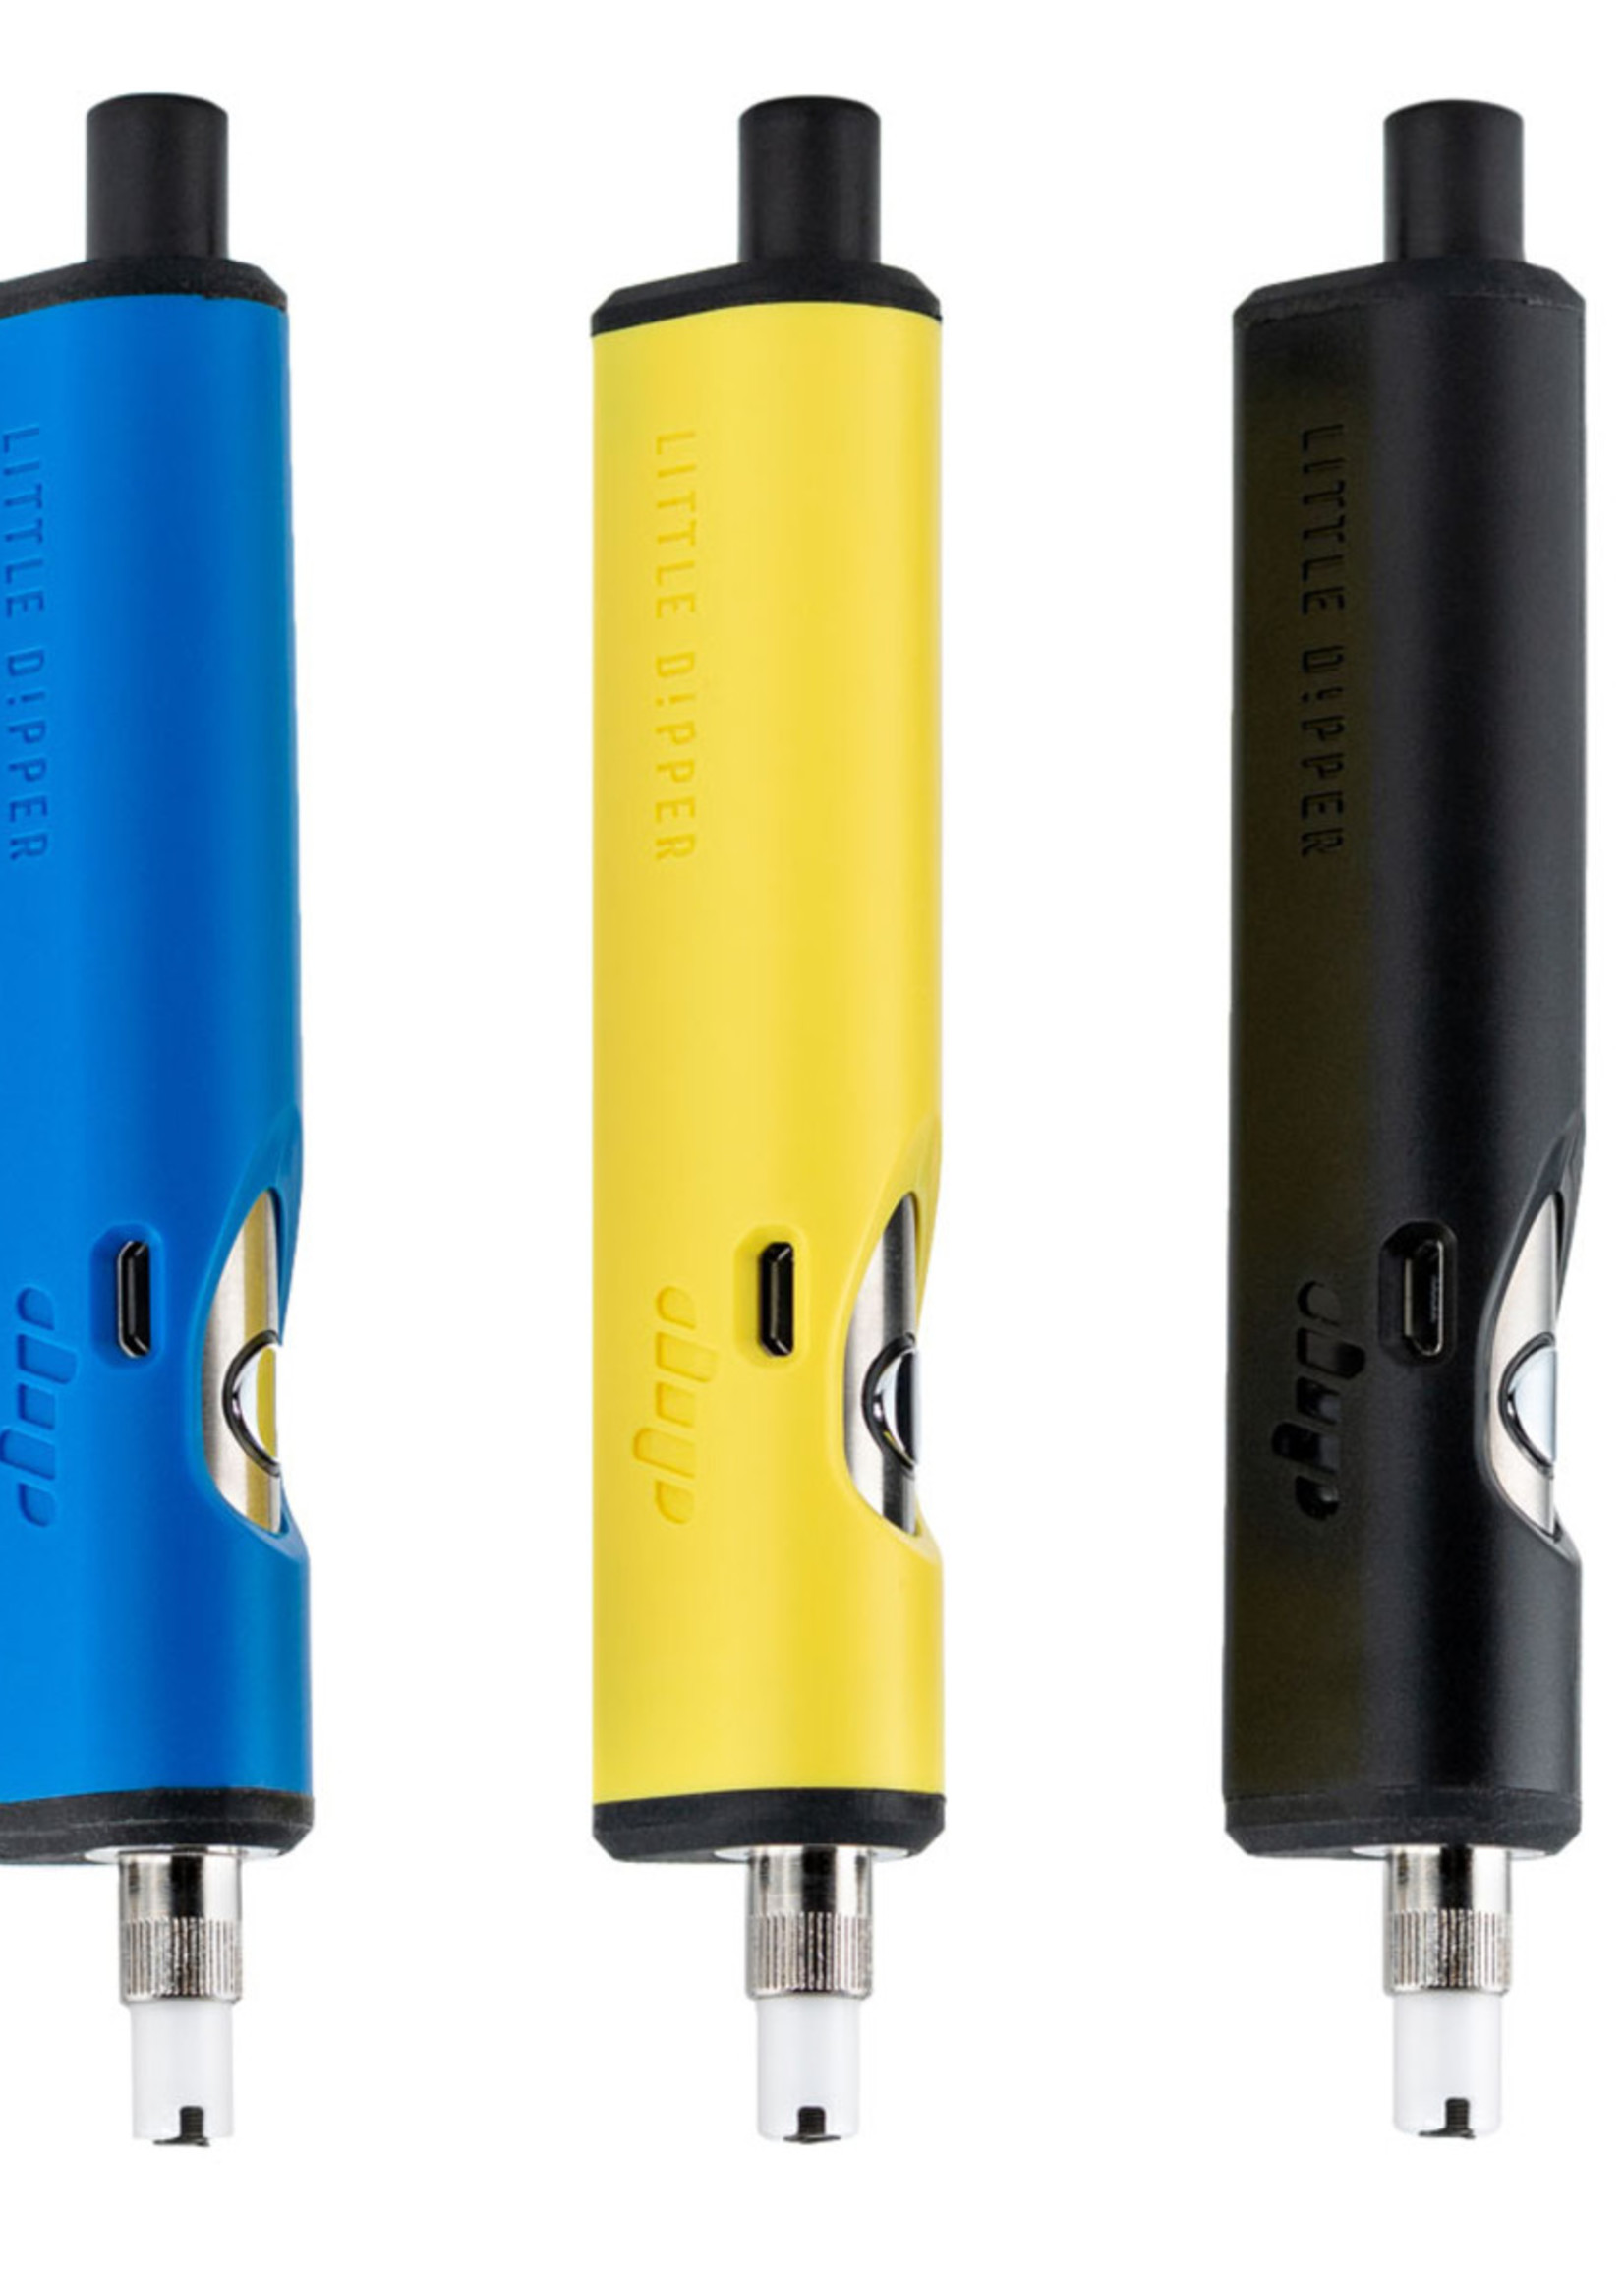 Dip Devices Dip Devices Little Dipper Dab Straw Vaporizer | 600mAh